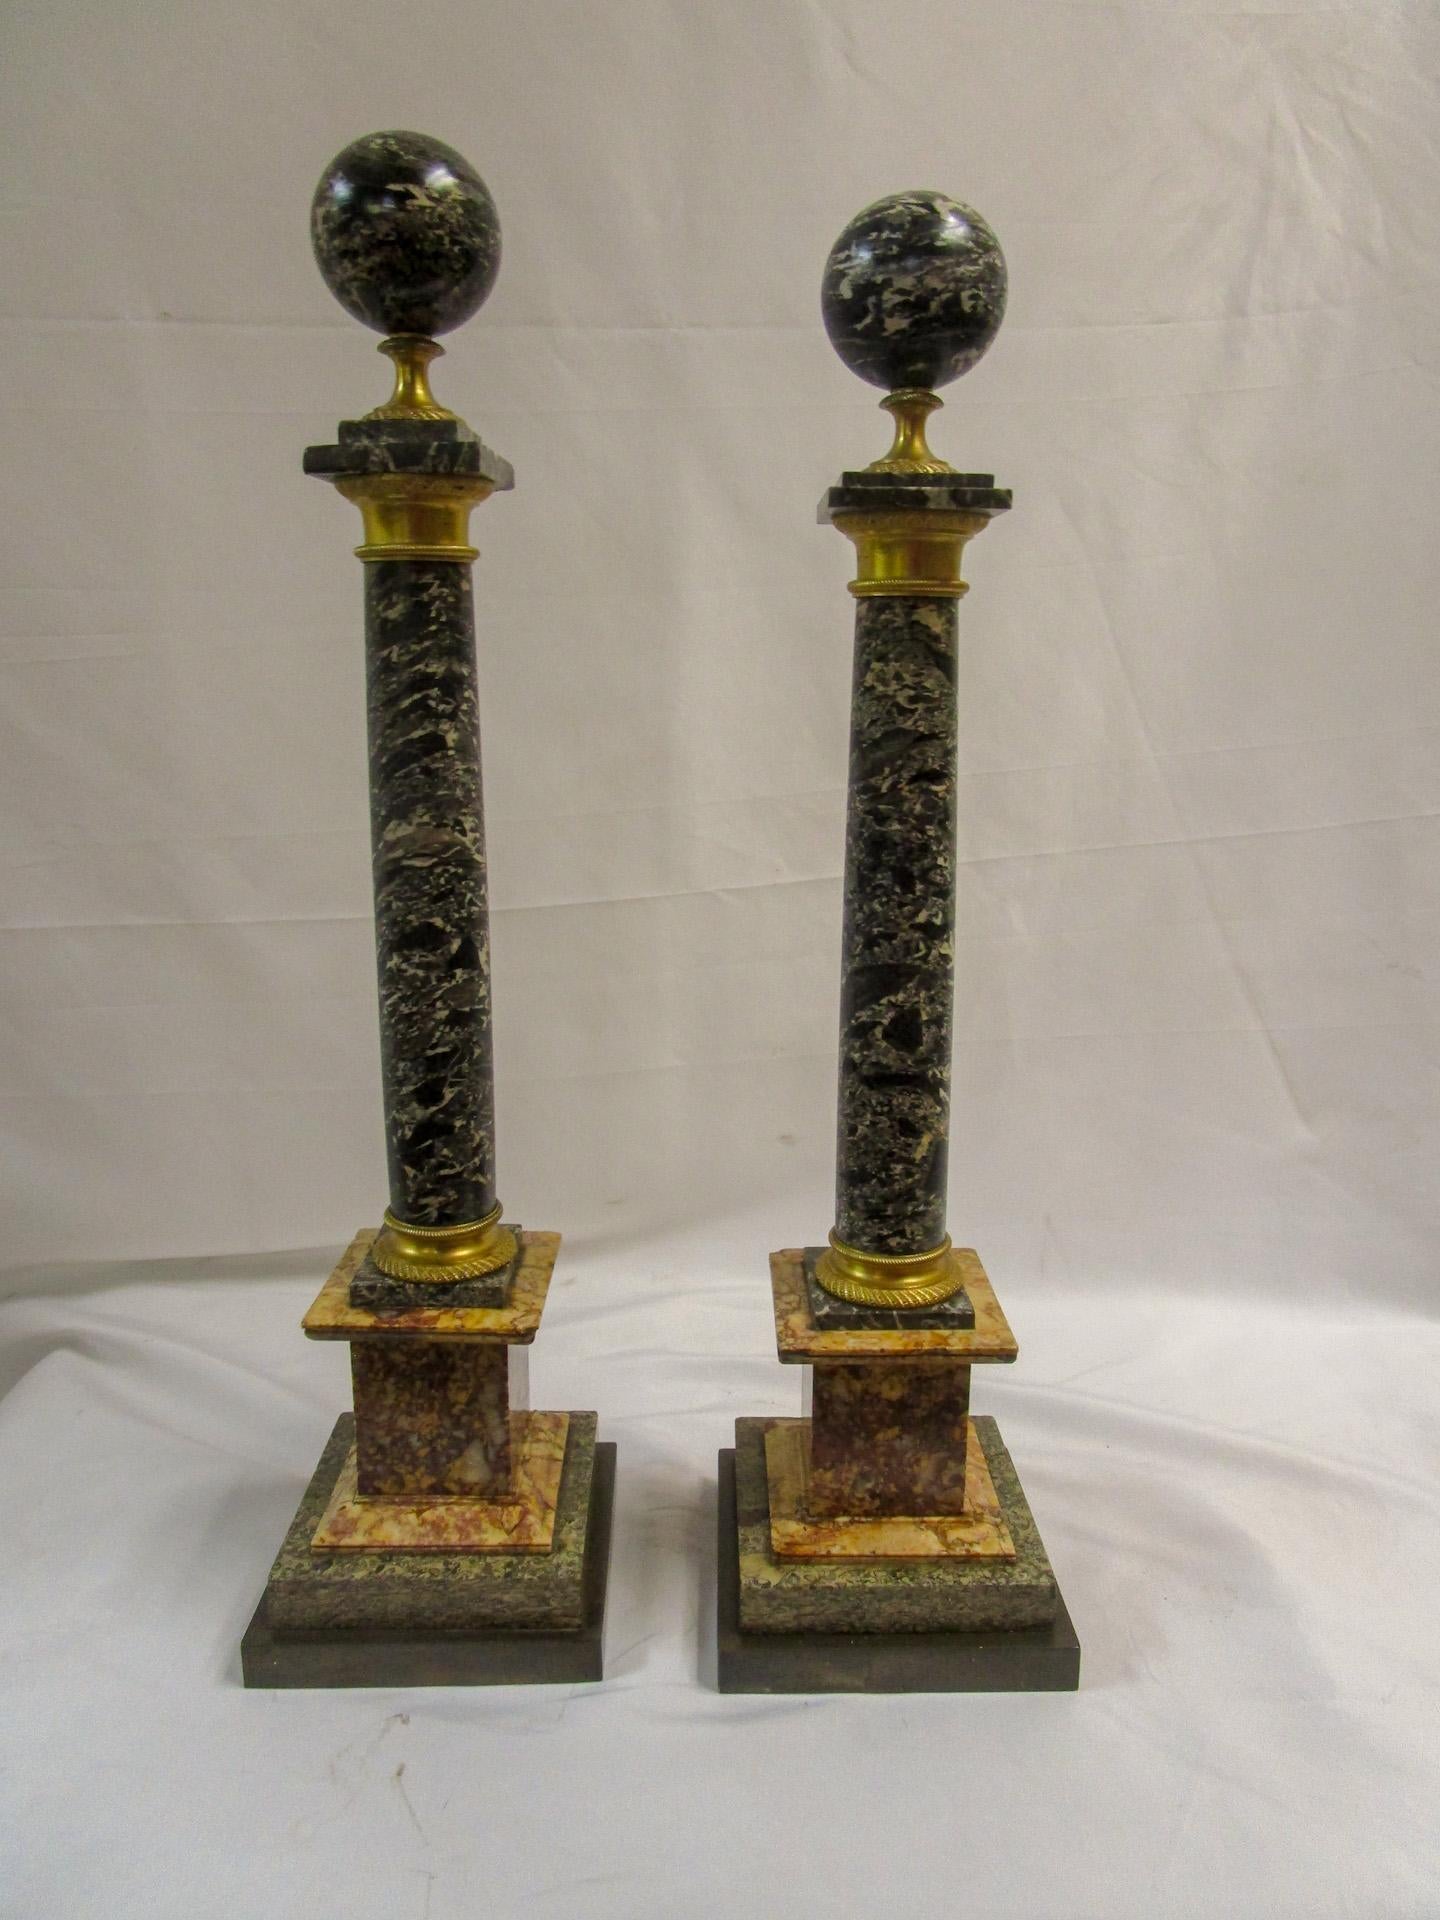 Italian 19th Century Neoclassical Style Ormolu and Marble Columns w/ Orb Finials For Sale 4